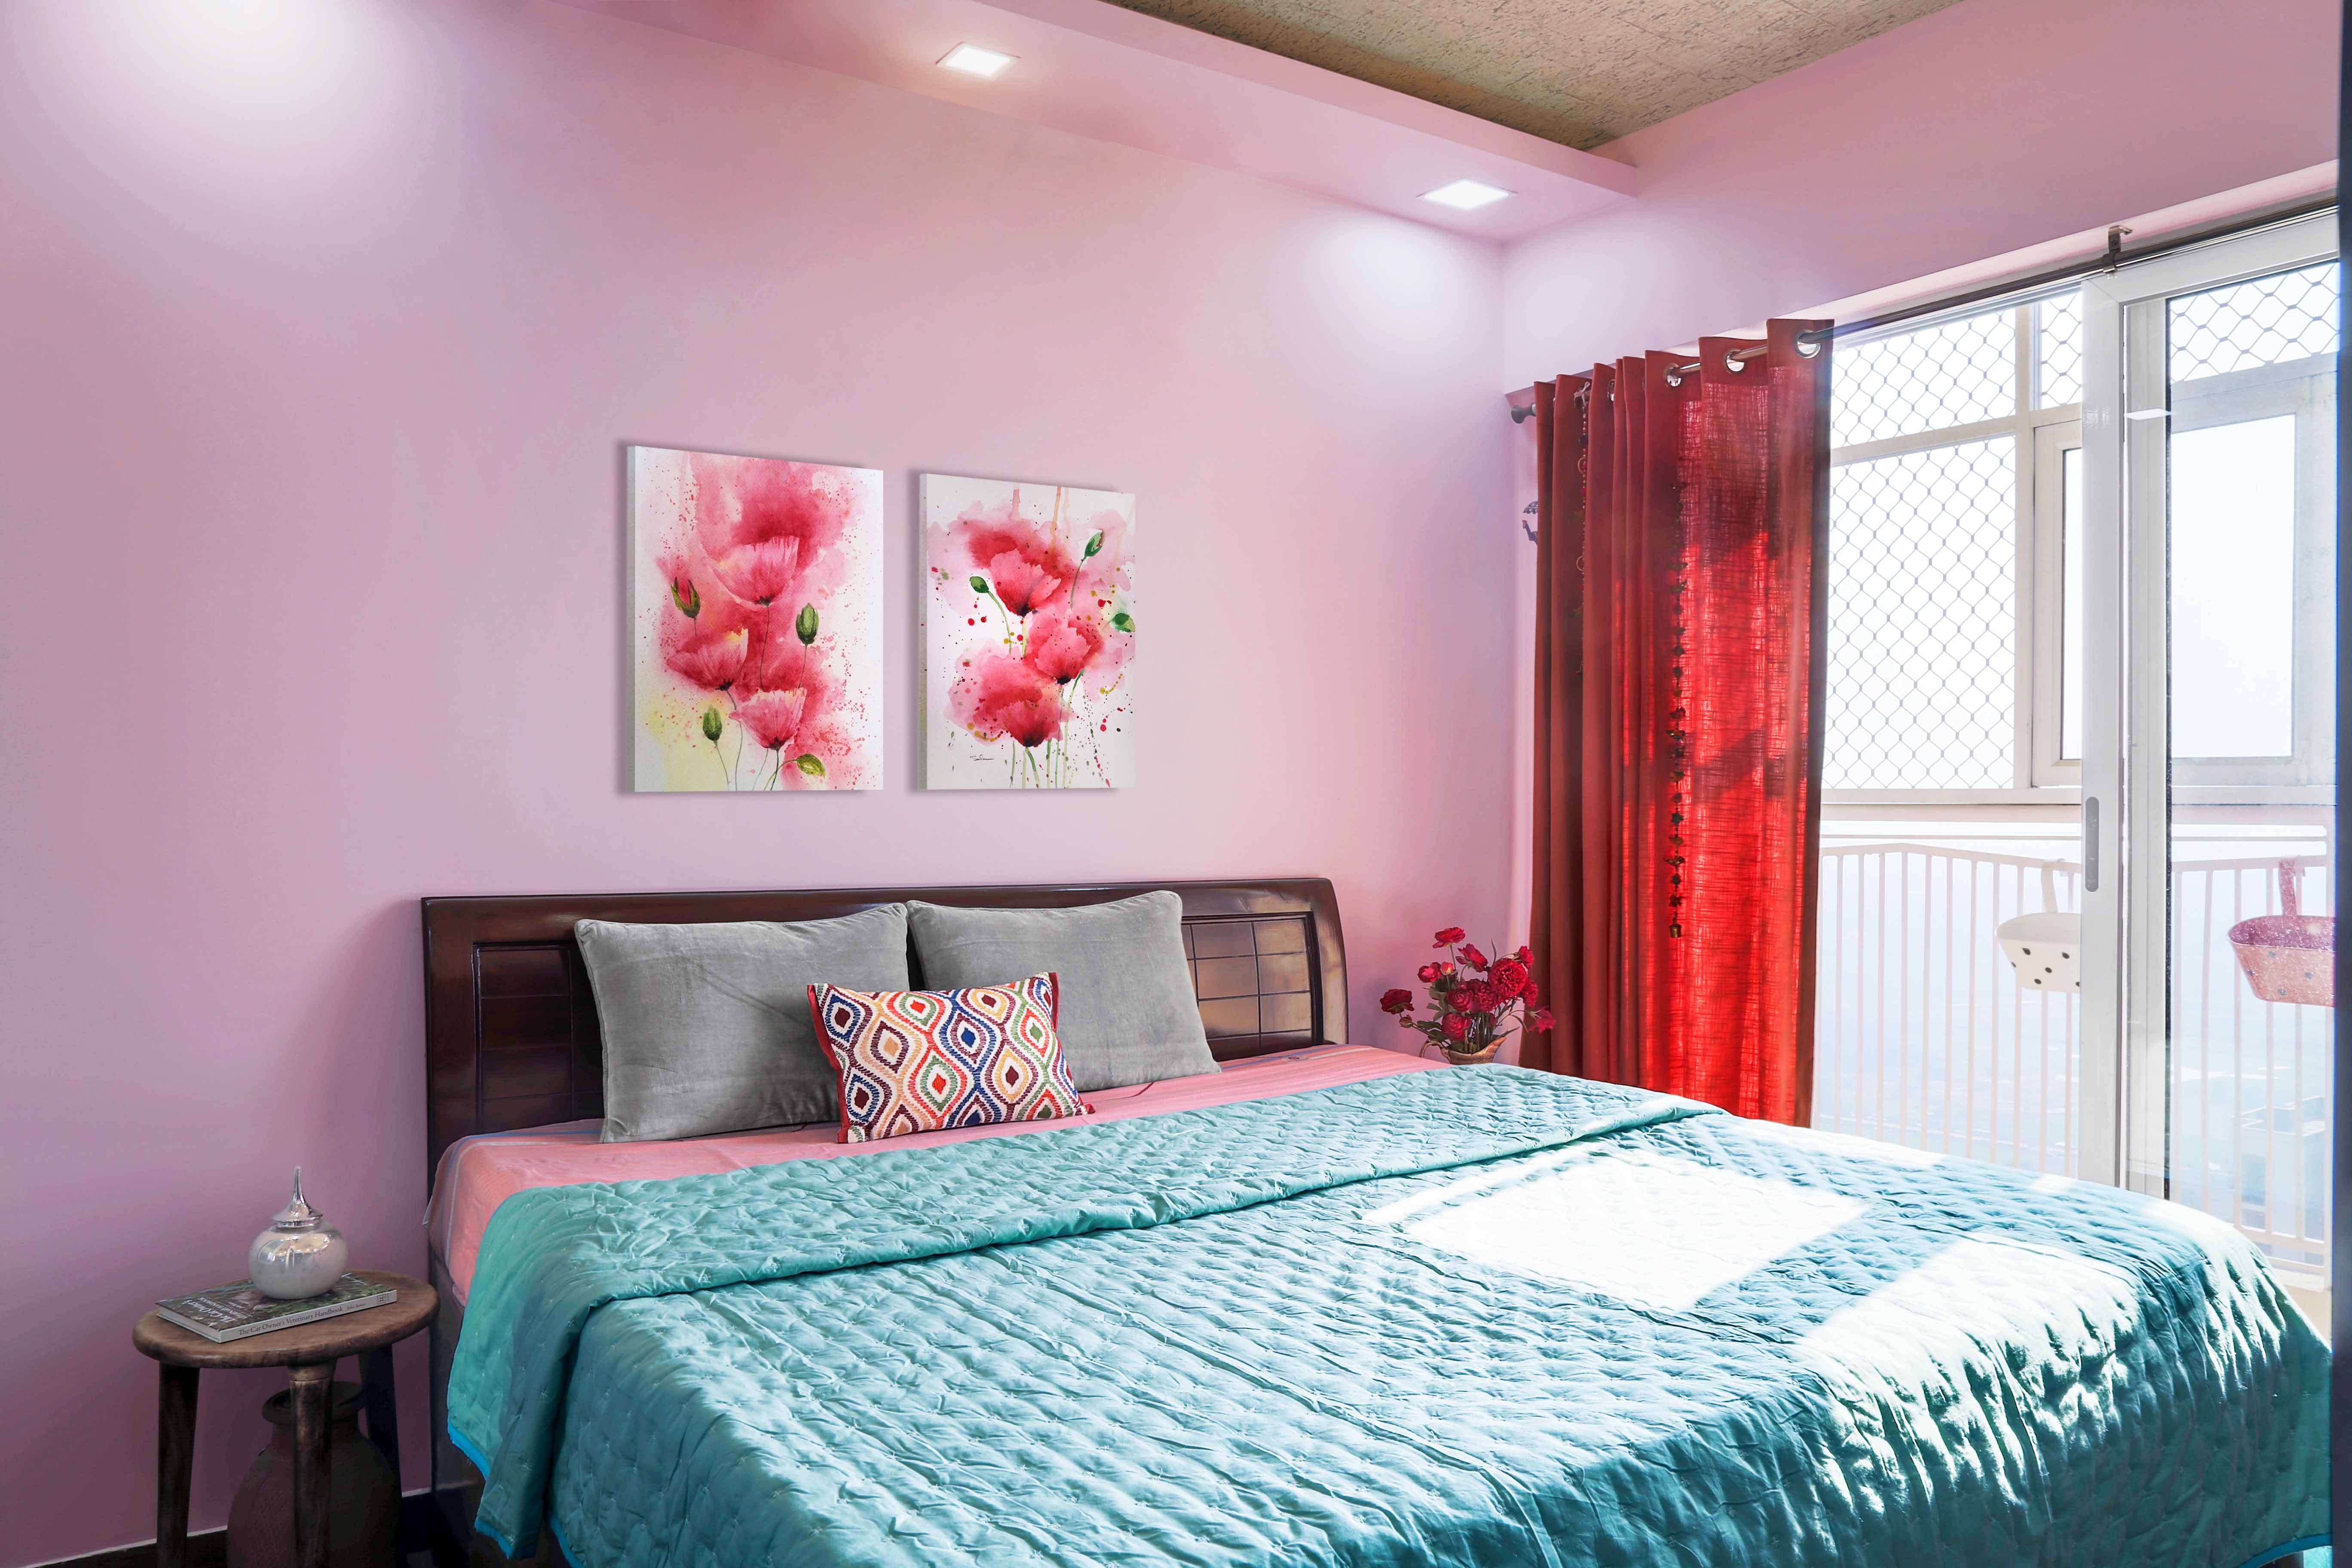 Contemporary Pink Guest Room Design With Wooden Queen-Sized Bed